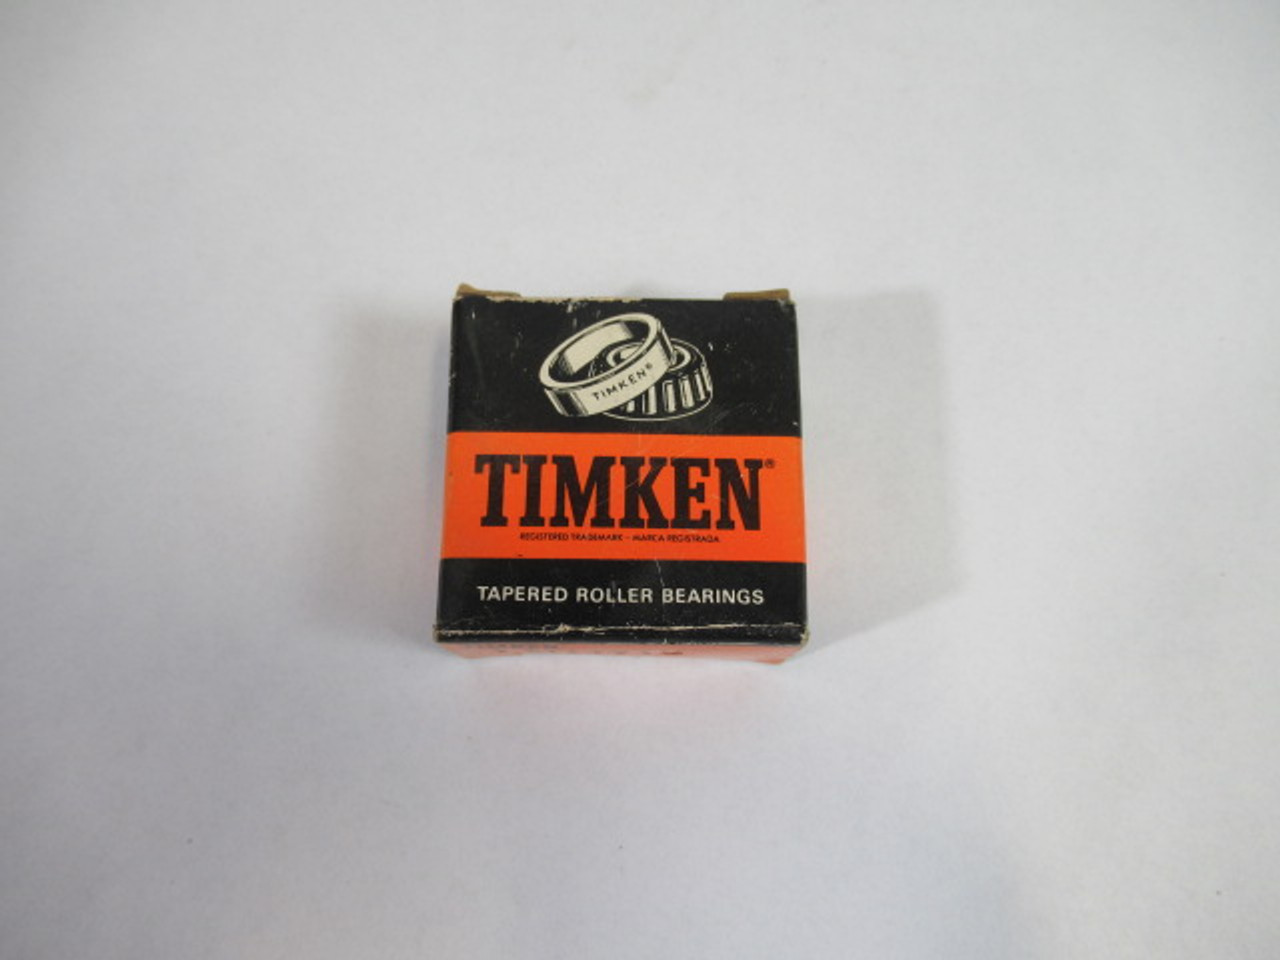 Timken LM11710 Roller Bearing Cup 1.57" OD 0.42" Width ! NEW !